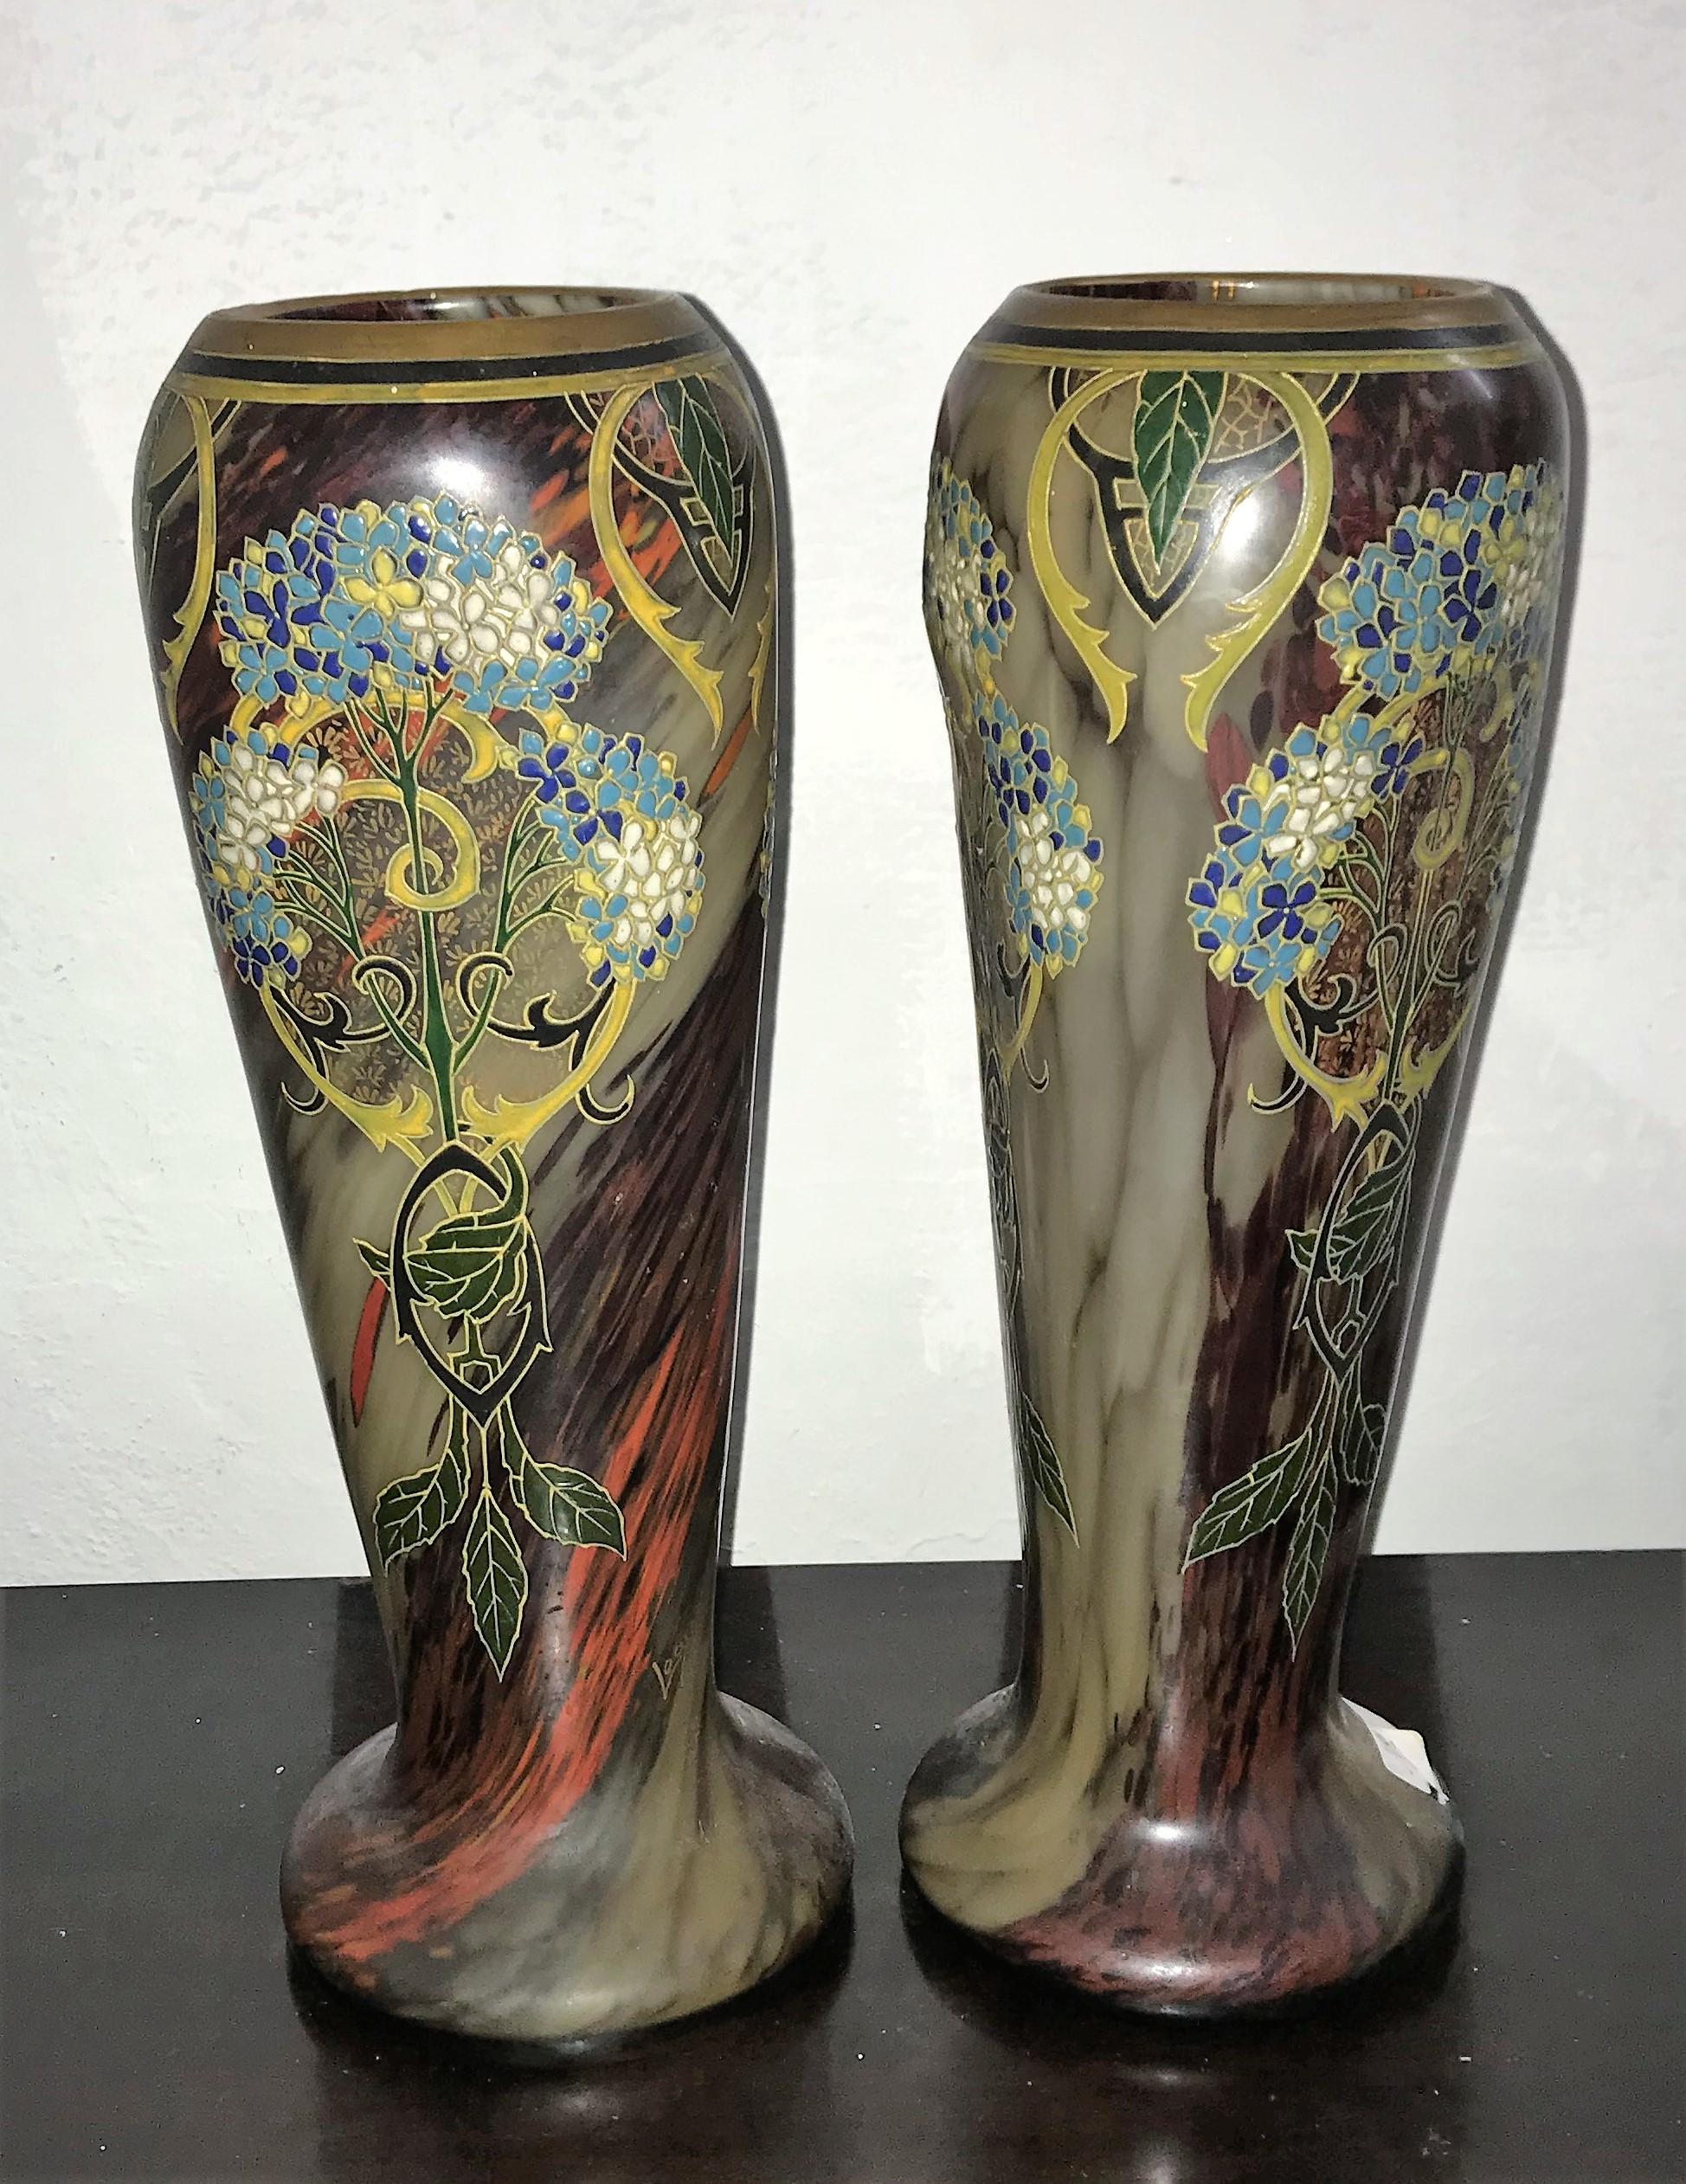 Pair of Large Art Nouveau Blown Glass and Enamel Vases by Legras, France In Good Condition For Sale In Merida, Yucatan